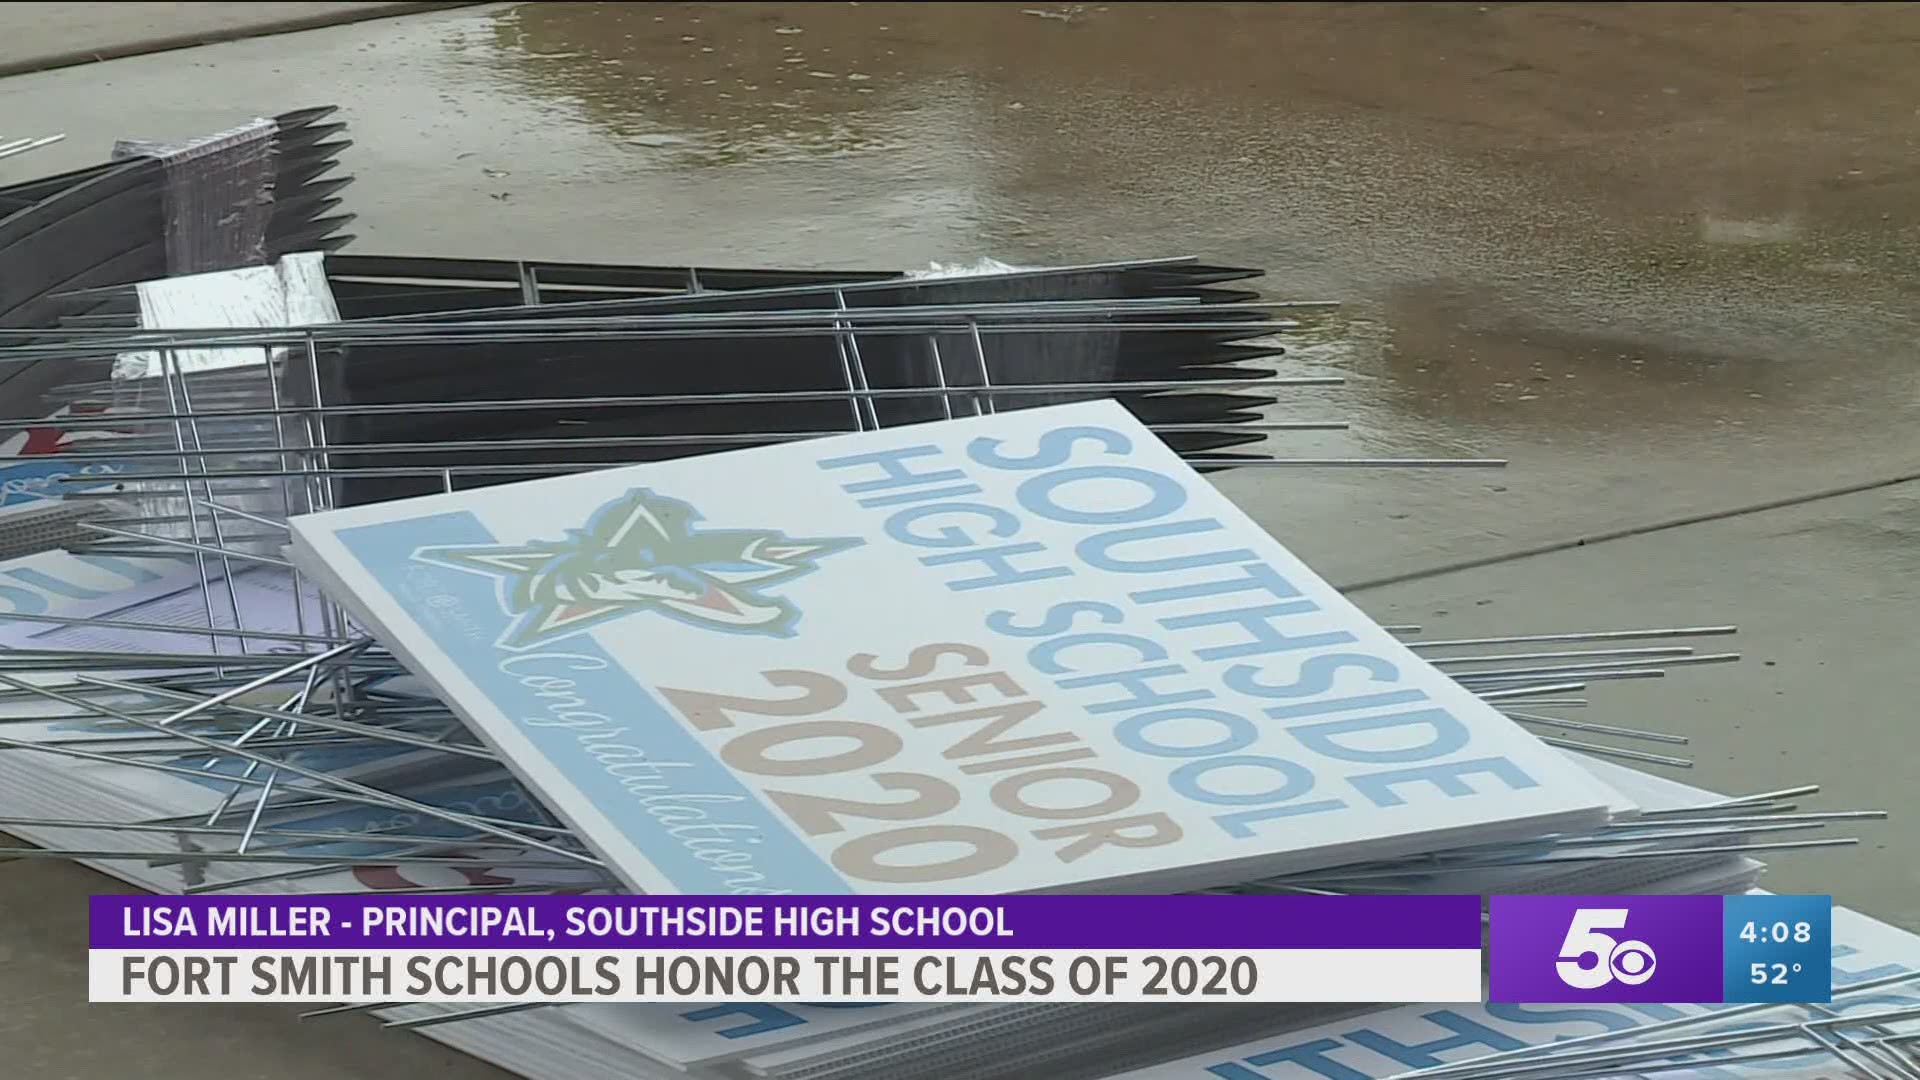 Fort Smith schools honor class of 2020